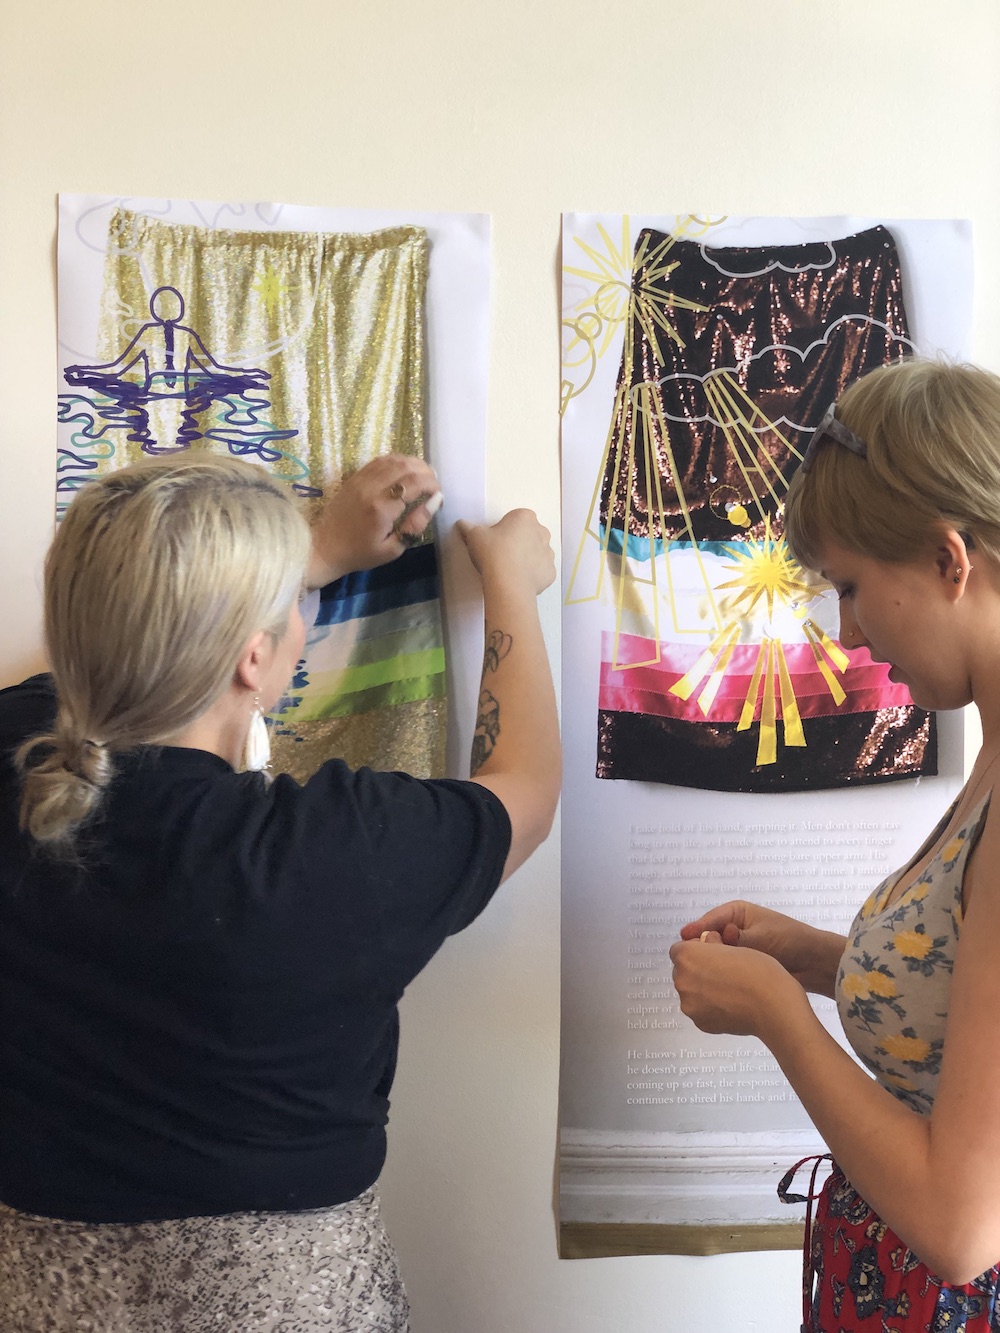 Two women hang tapestries on a wall